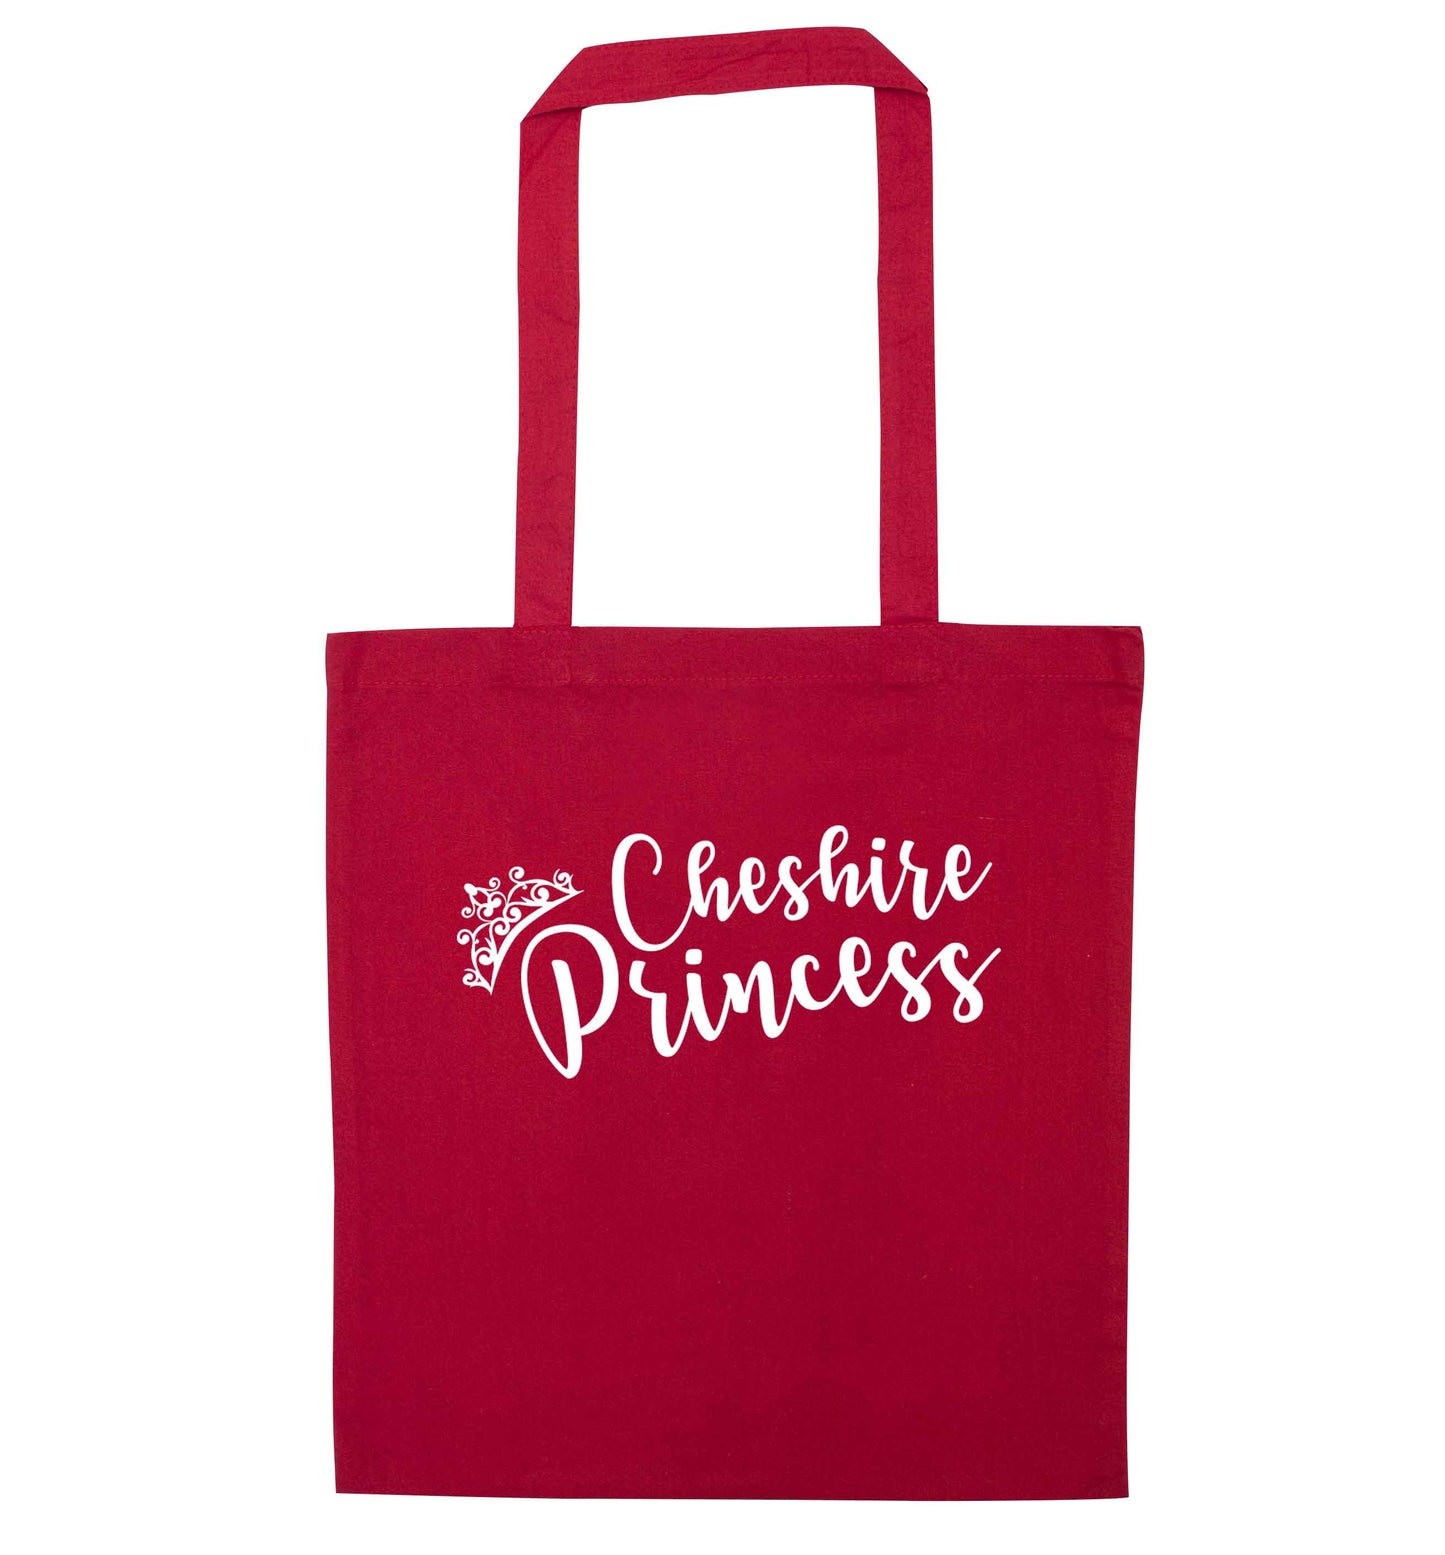 Cheshire princess red tote bag